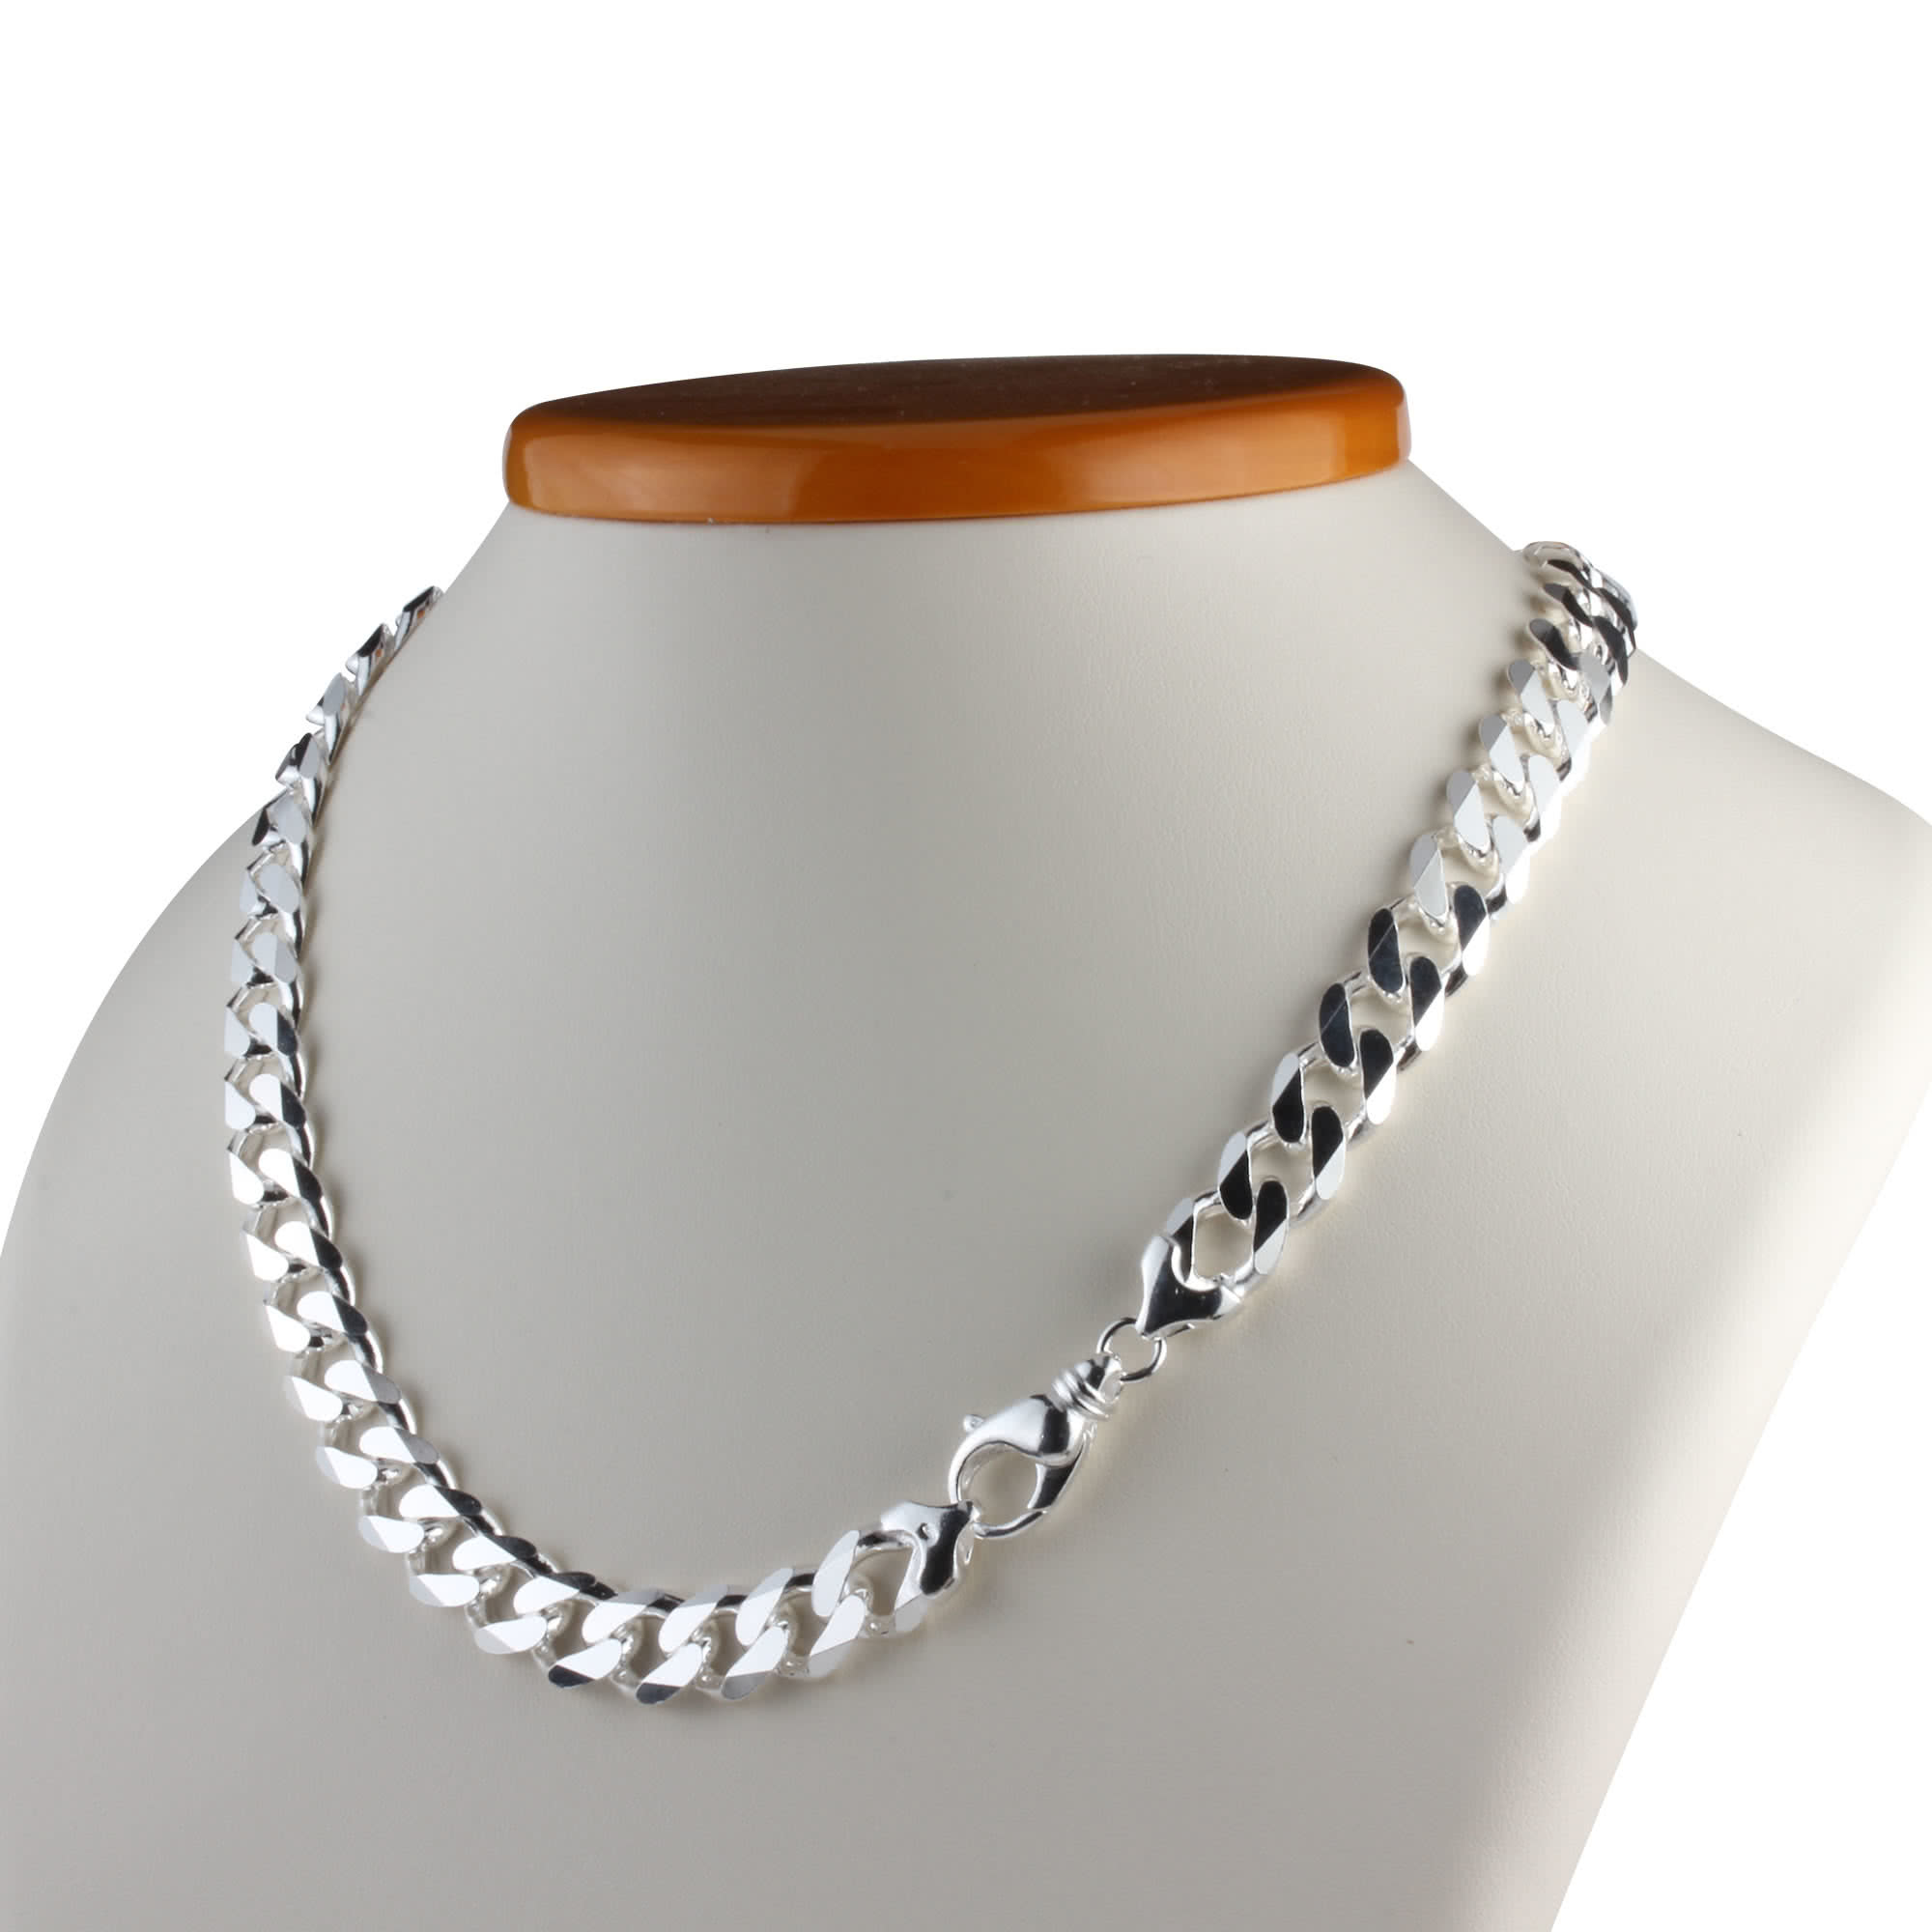 Edge Only Heavy Curb Chain Silver in Metallic for Men Mens Jewellery Necklaces 